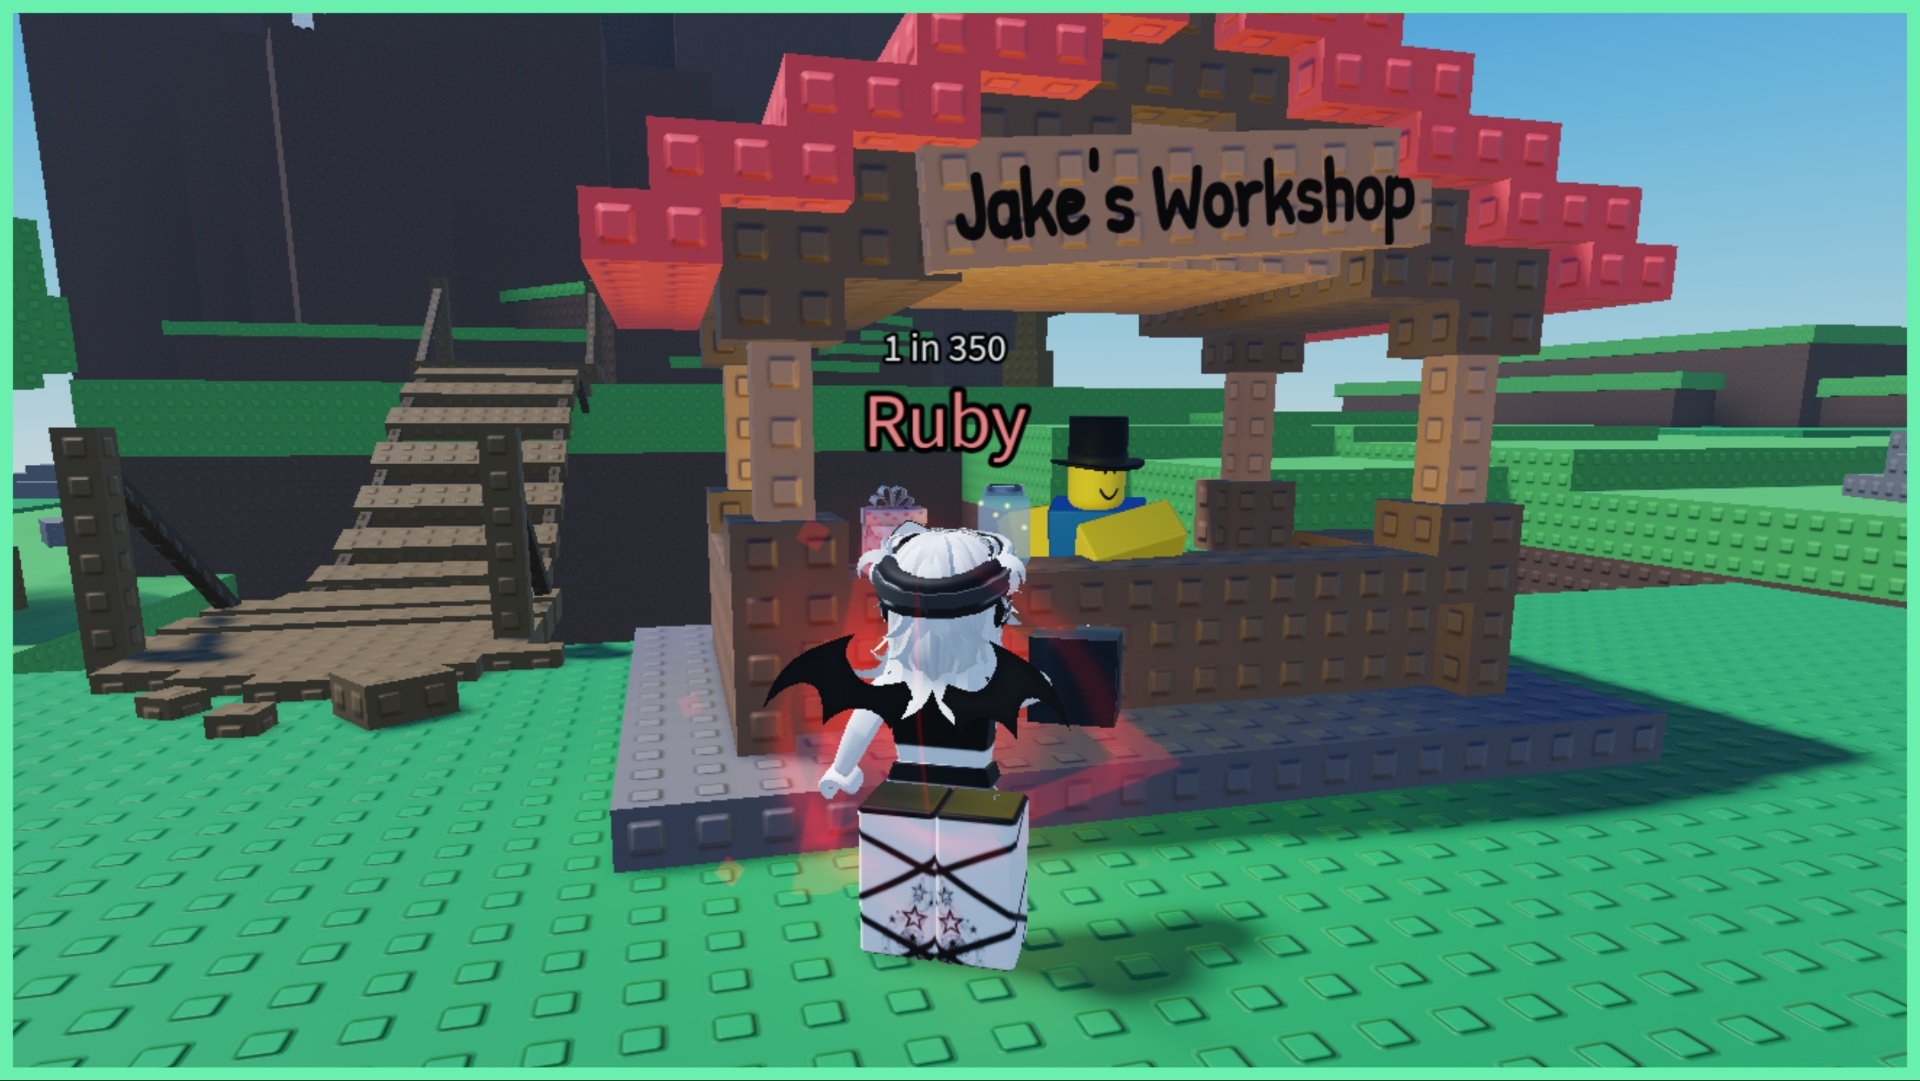 the image shows my avatar with a red ruby aura stood before jakes workshop. Jake, the npc is wearing a top hat and leaning against his shack